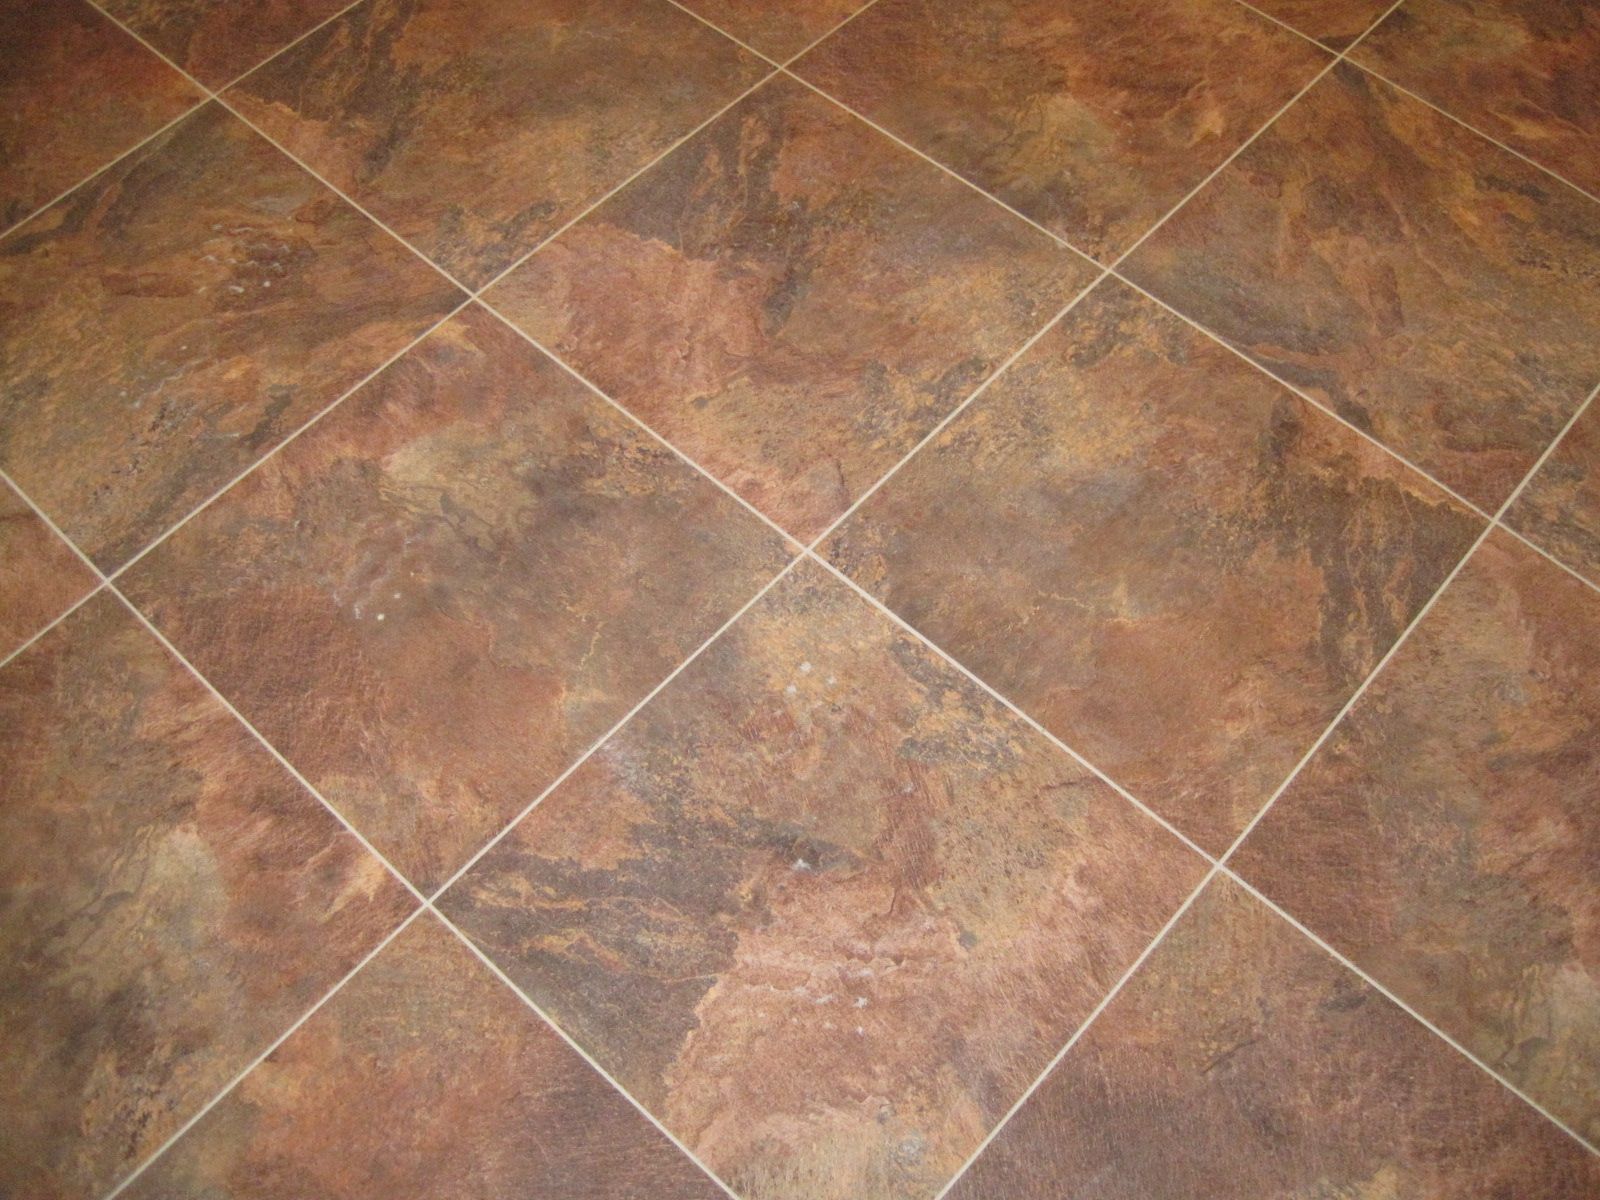 Prescott Tile and Grout Cleaning Experts